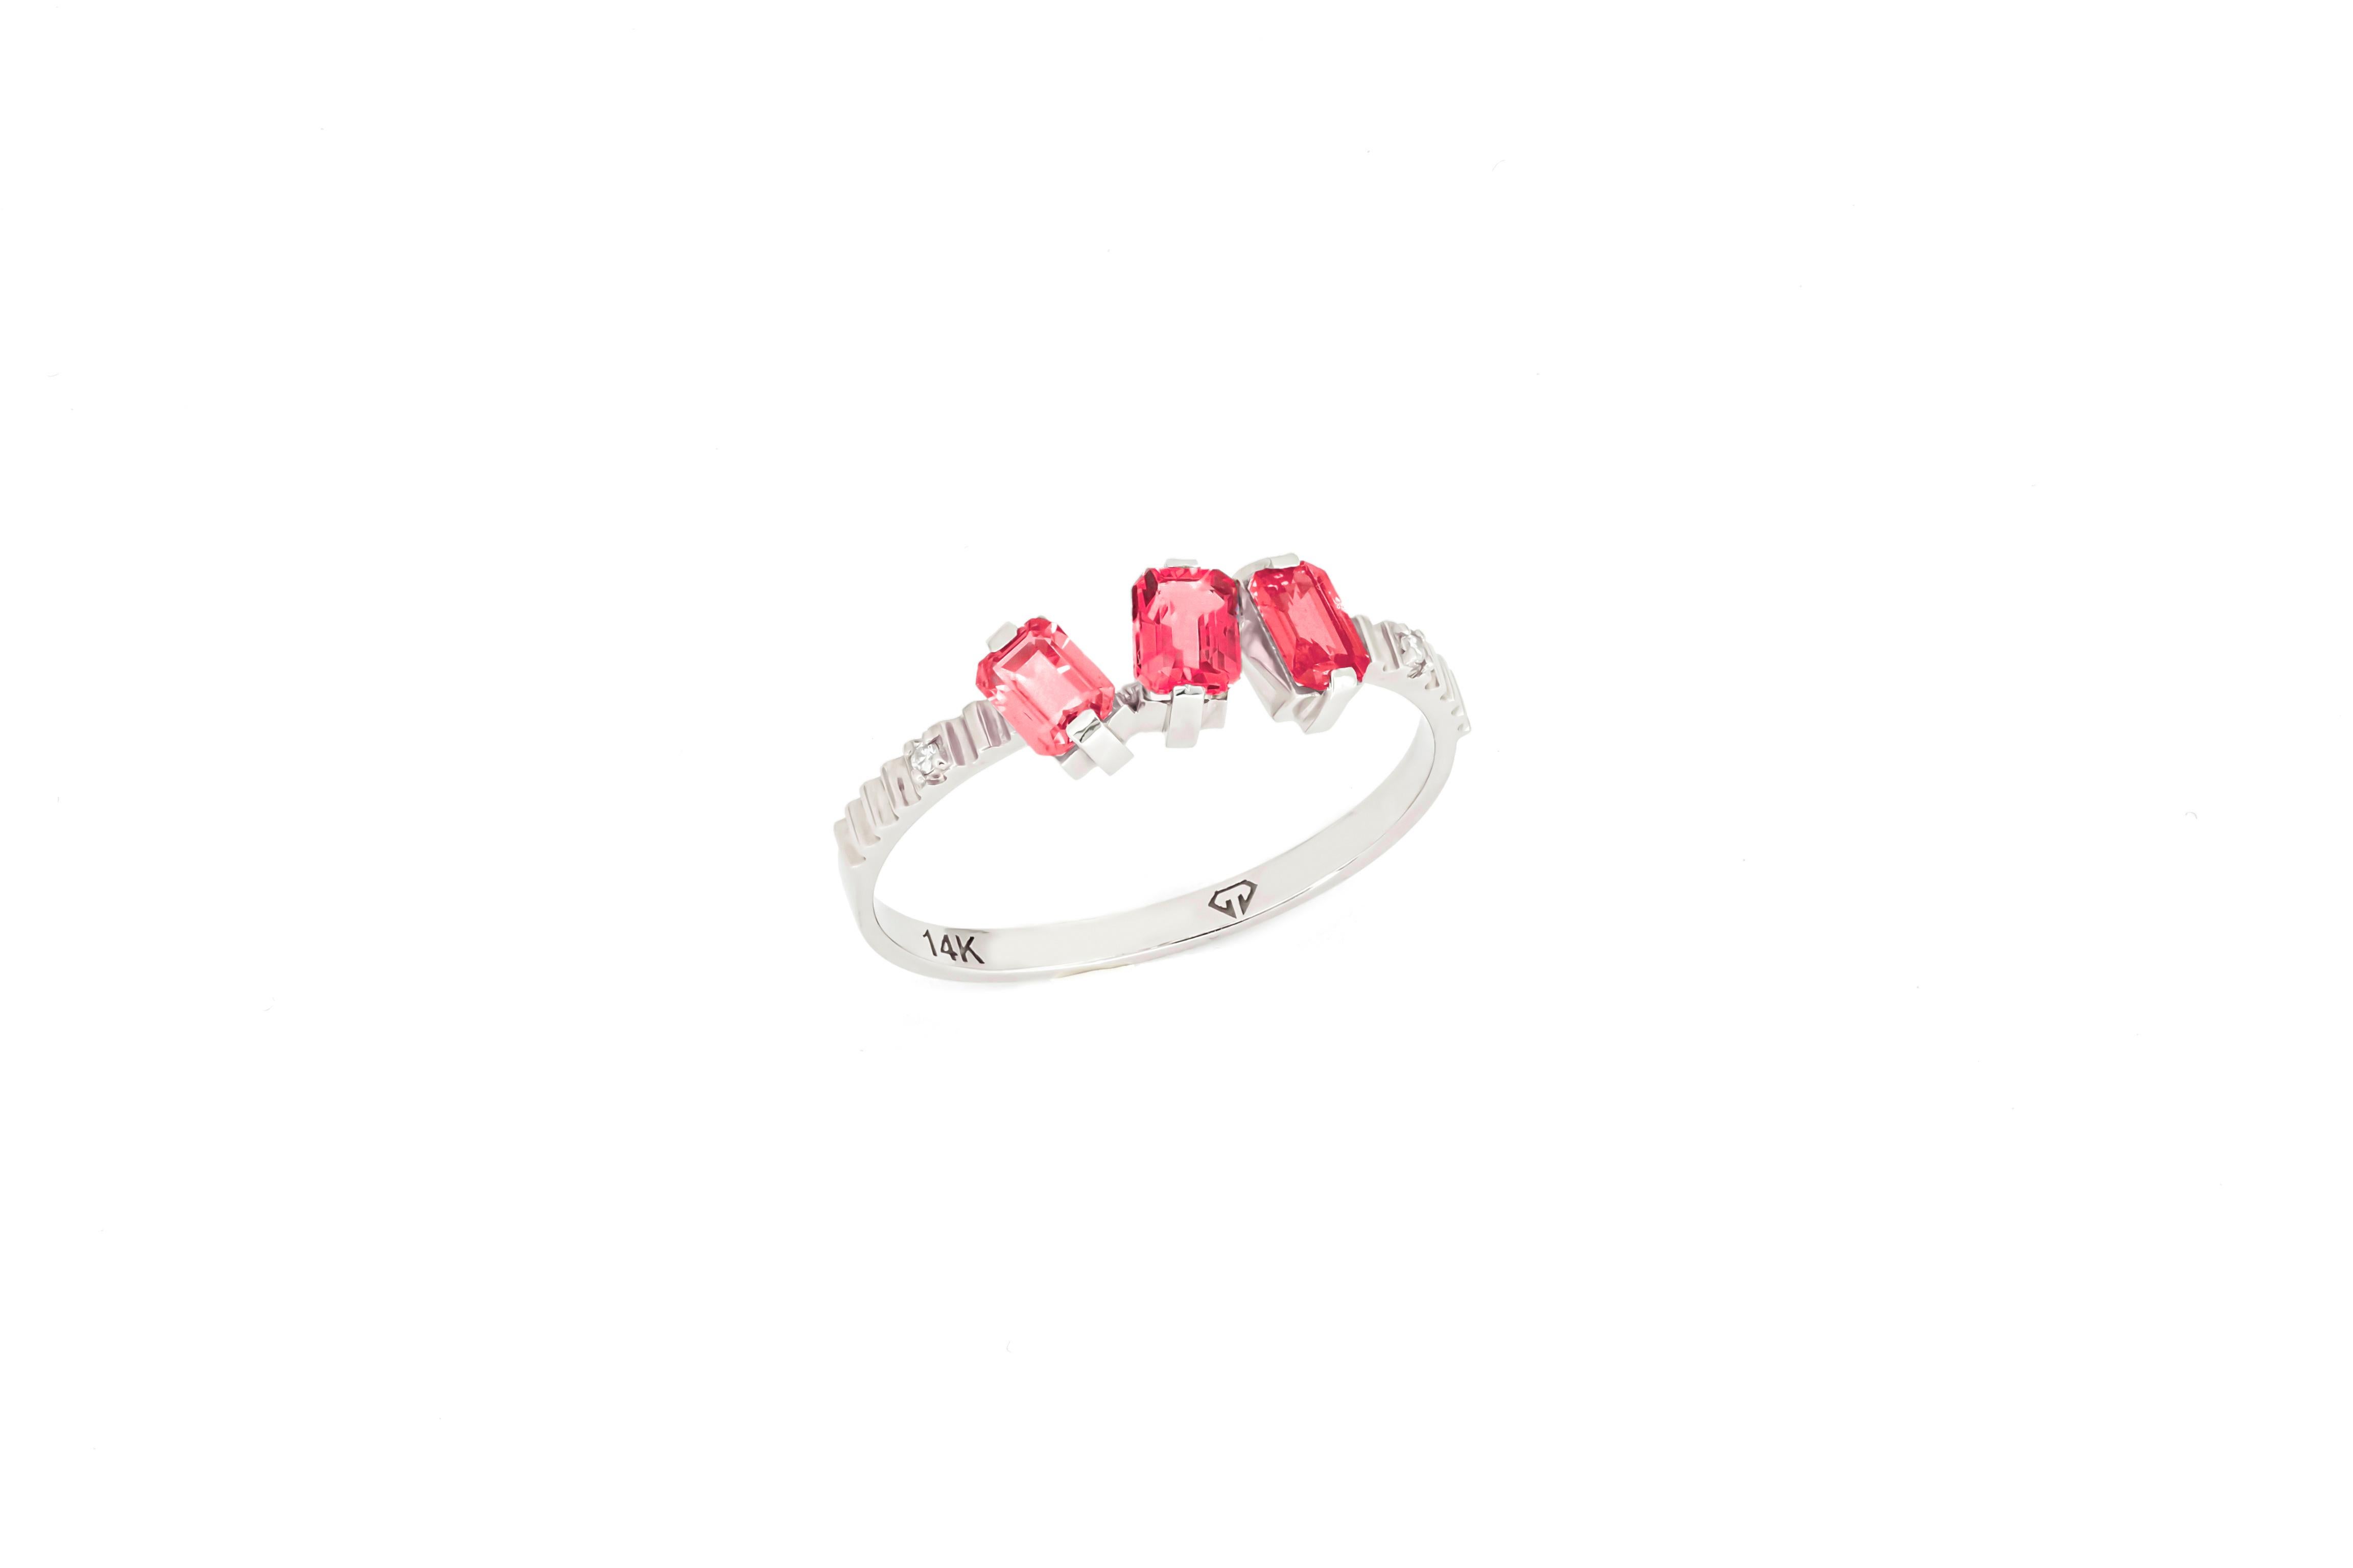 For Sale:  Monochrome red gemstone 14k ring.  6